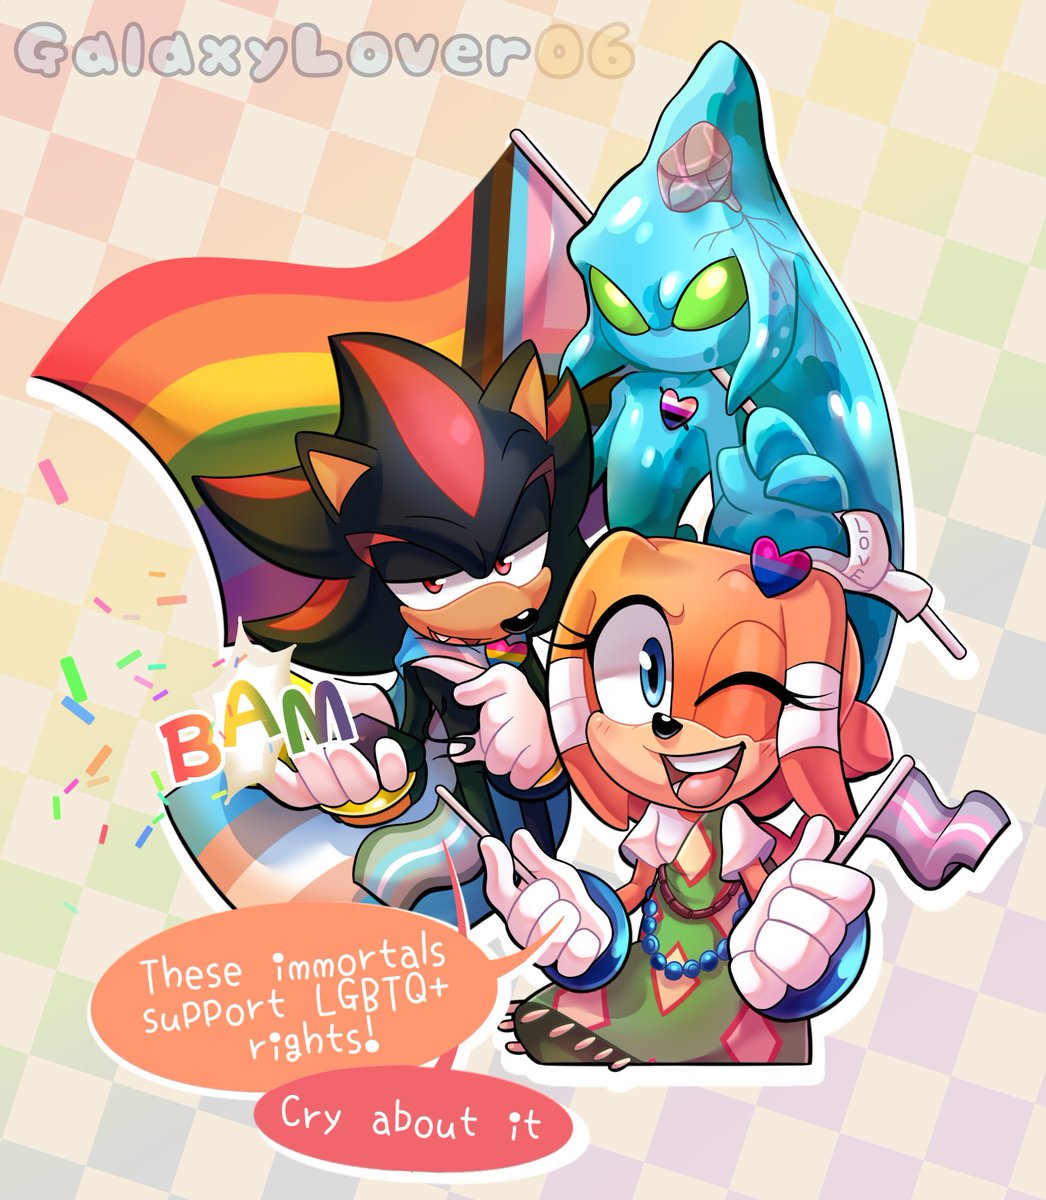 Better Watch out! 🏳️‍🌈💖
#SonicTheHedgehog #PrideArt